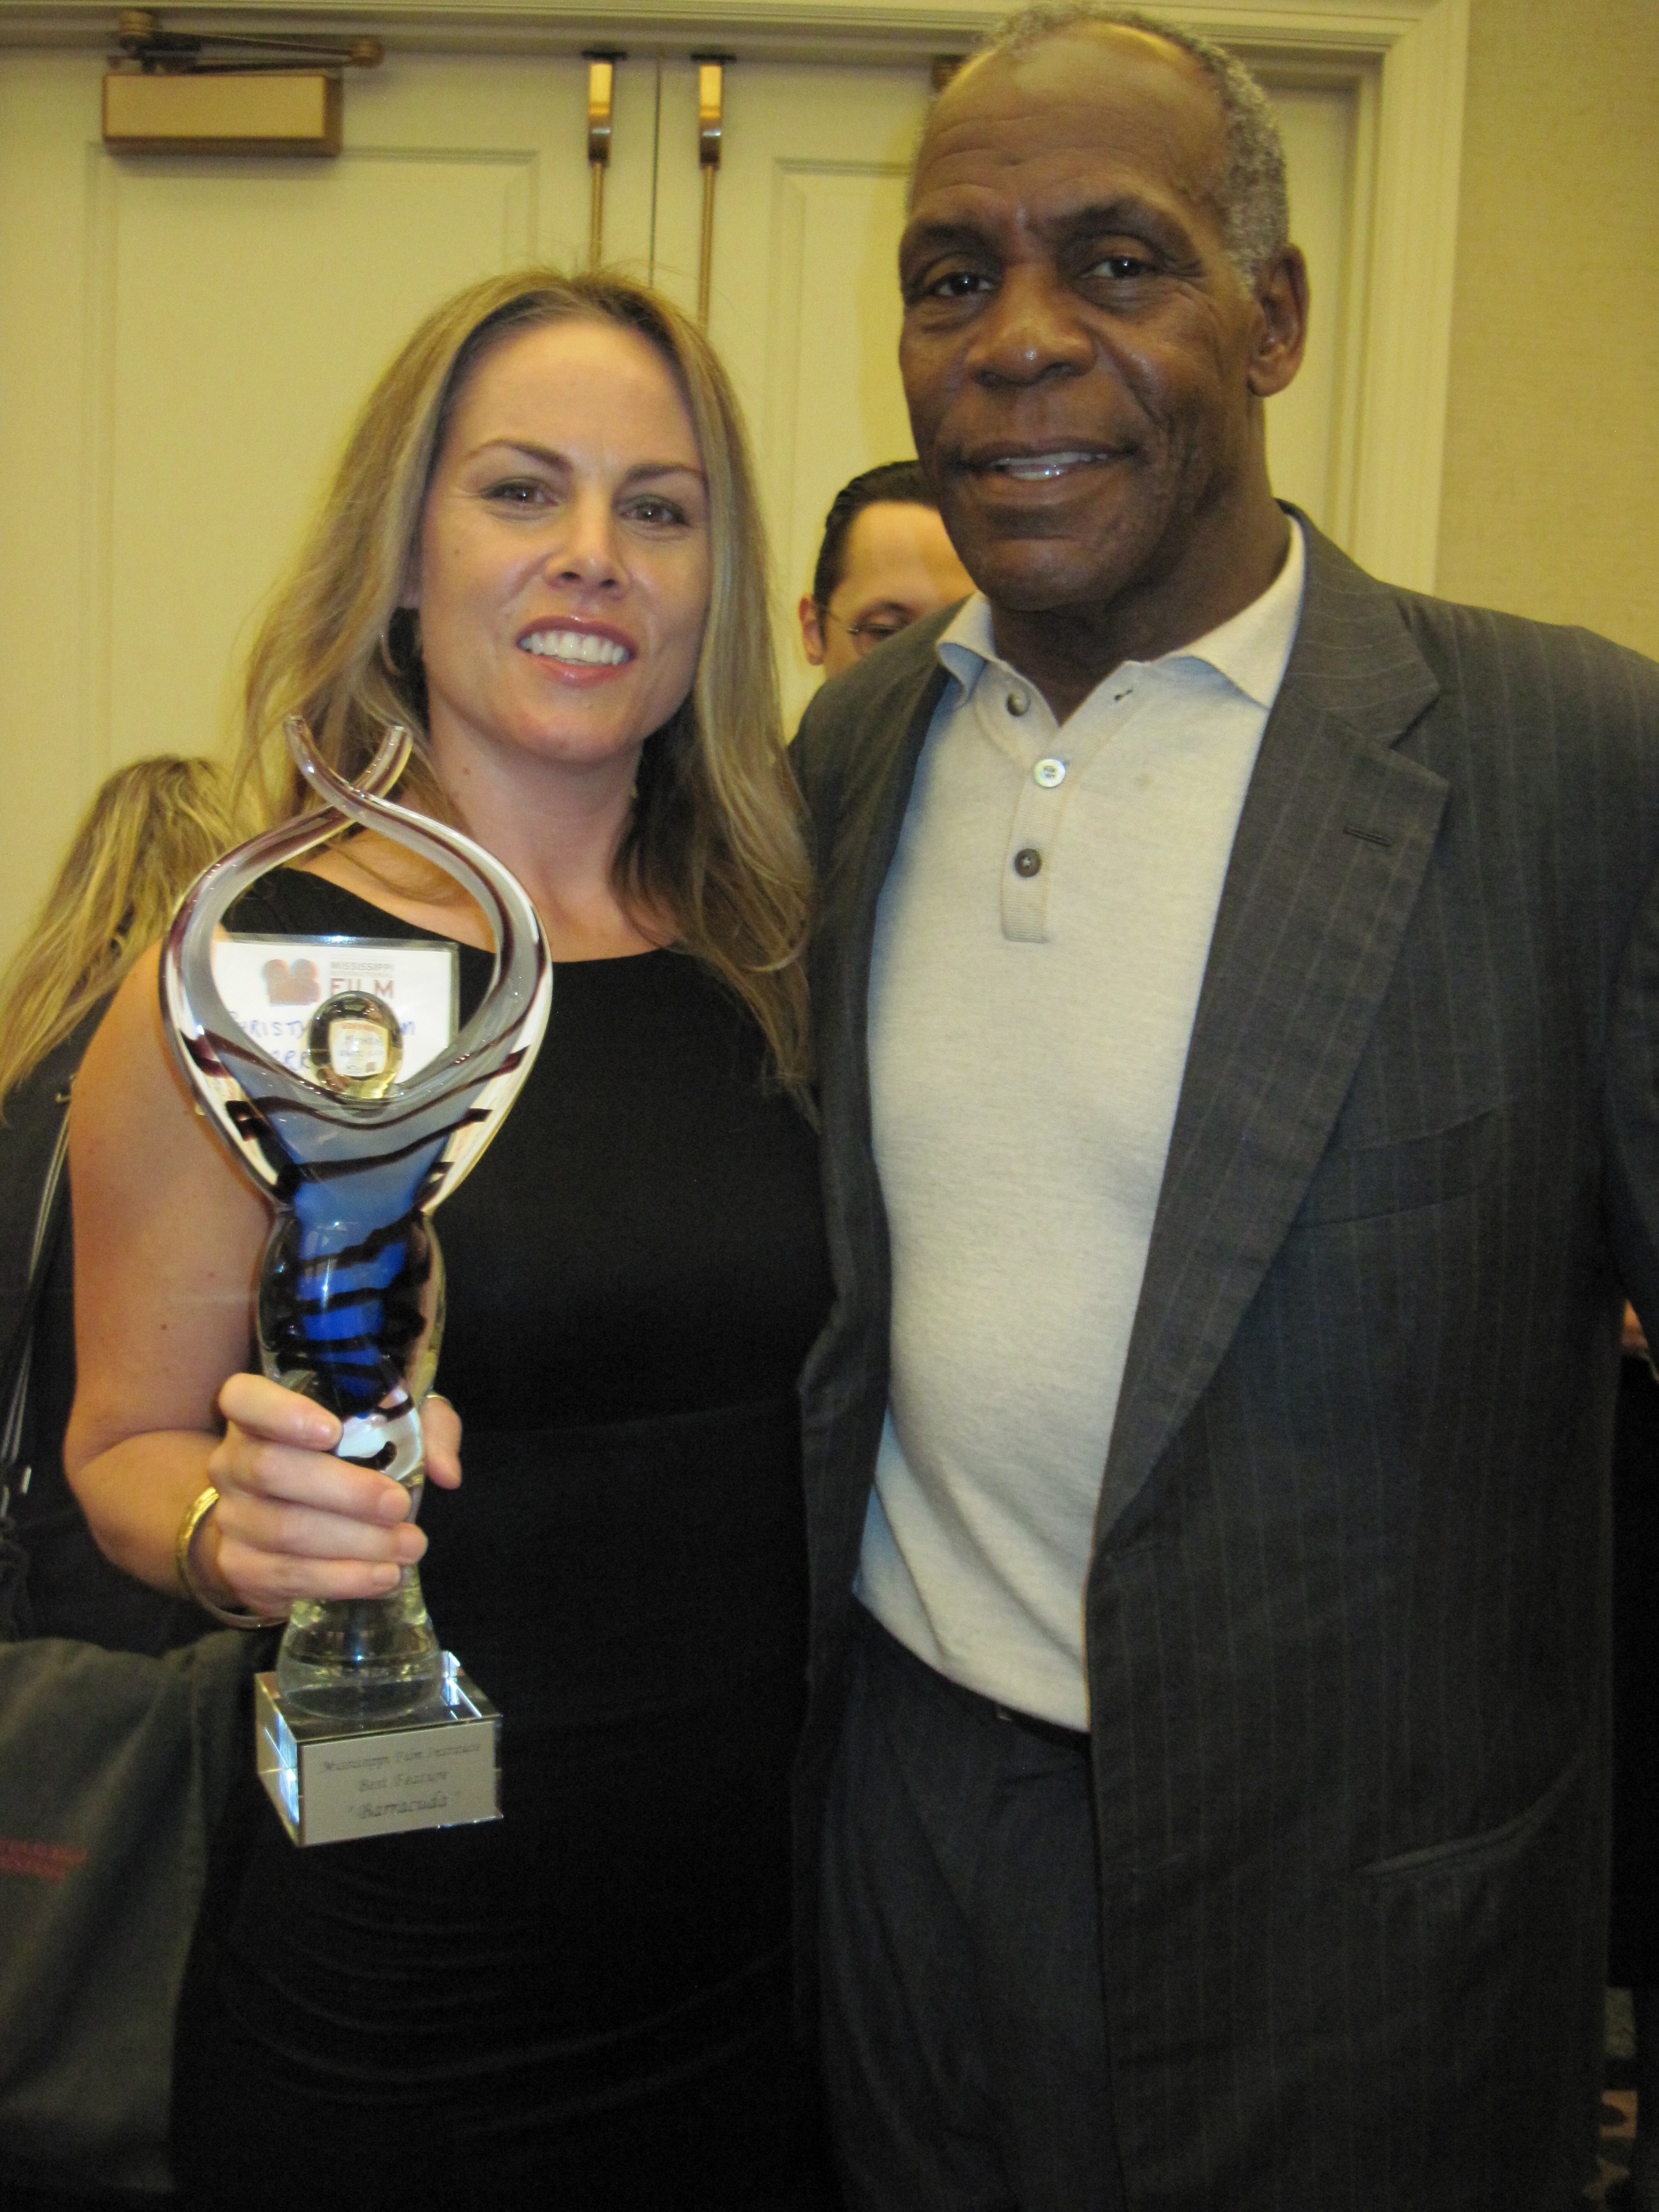 Danny Glover and Christy Oldham at The 2011 Mississippi International Film Festival